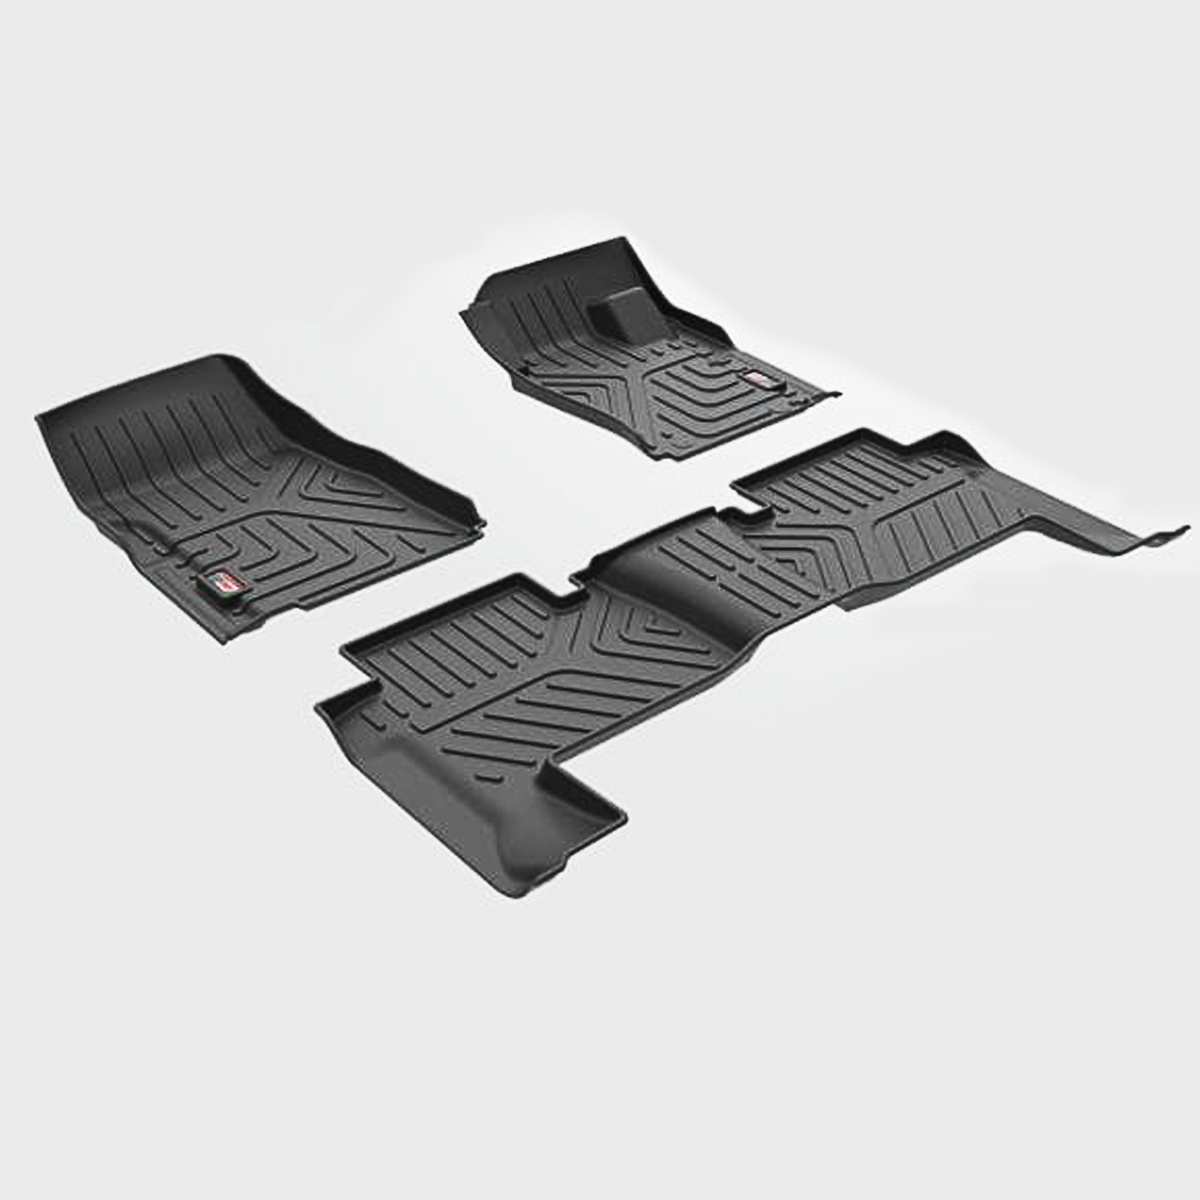 WeatherTech All-Purpose Mat - Multi-Use Mat for Everyday Living 44